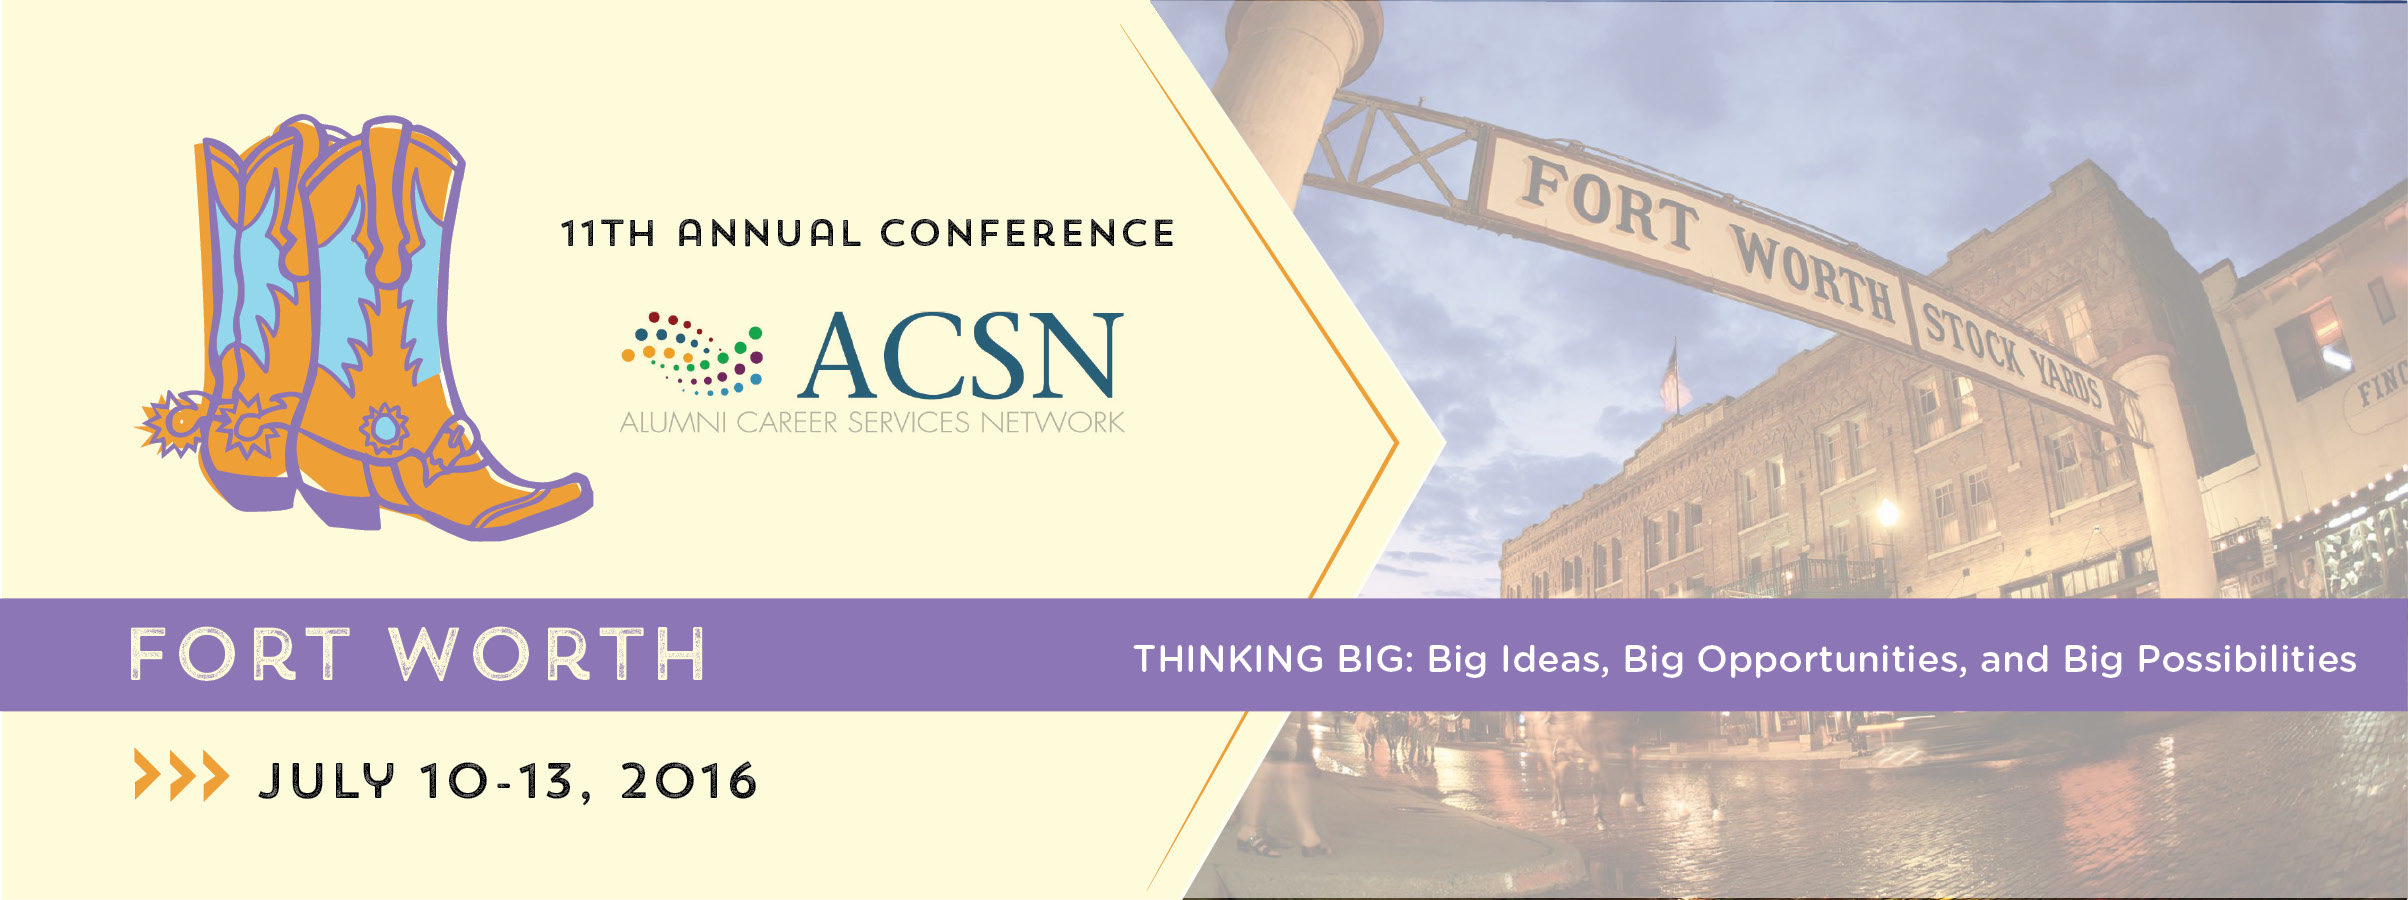 ACSN Annual Conference